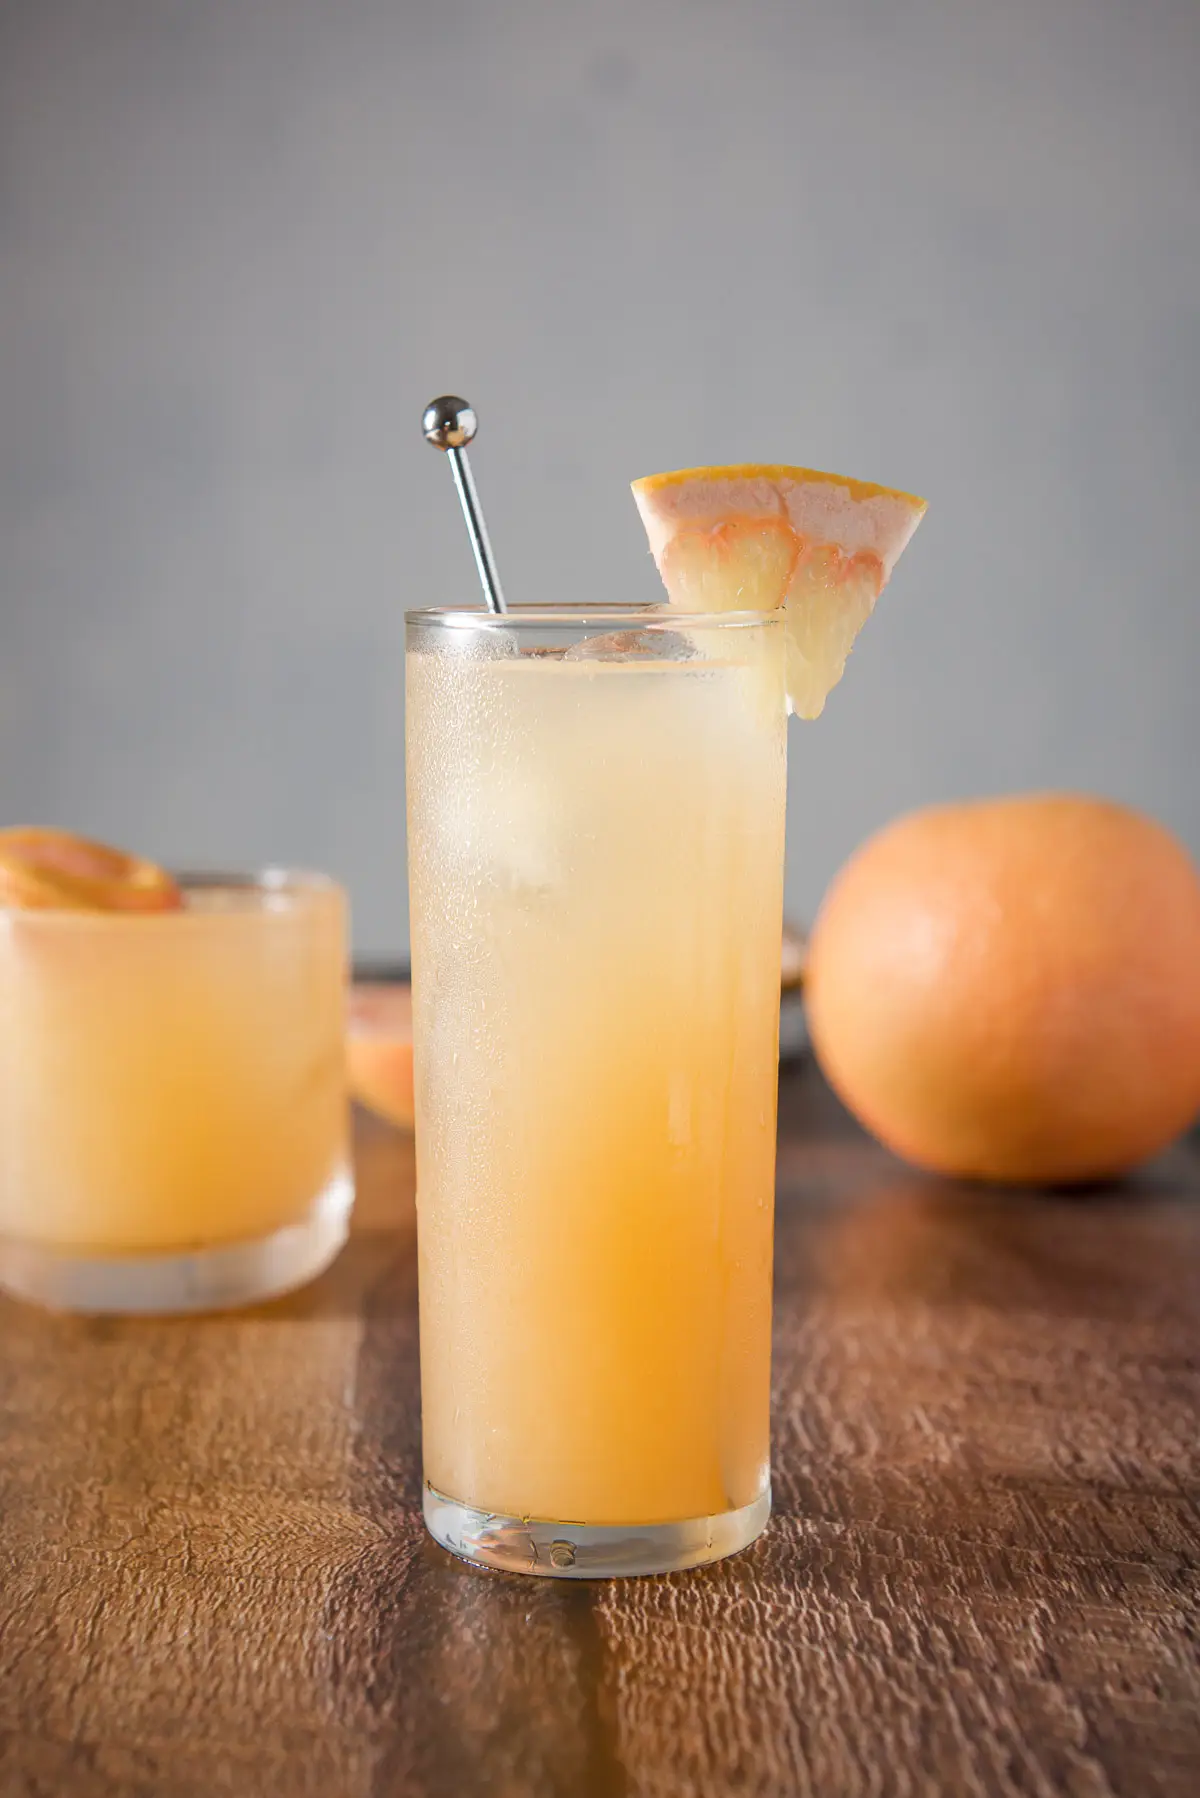 Vertical view of the tall collins glass with the cocktail with a stirrer and wedge of grapefruit. There is a shorter glass in the background and a whole grapefruit